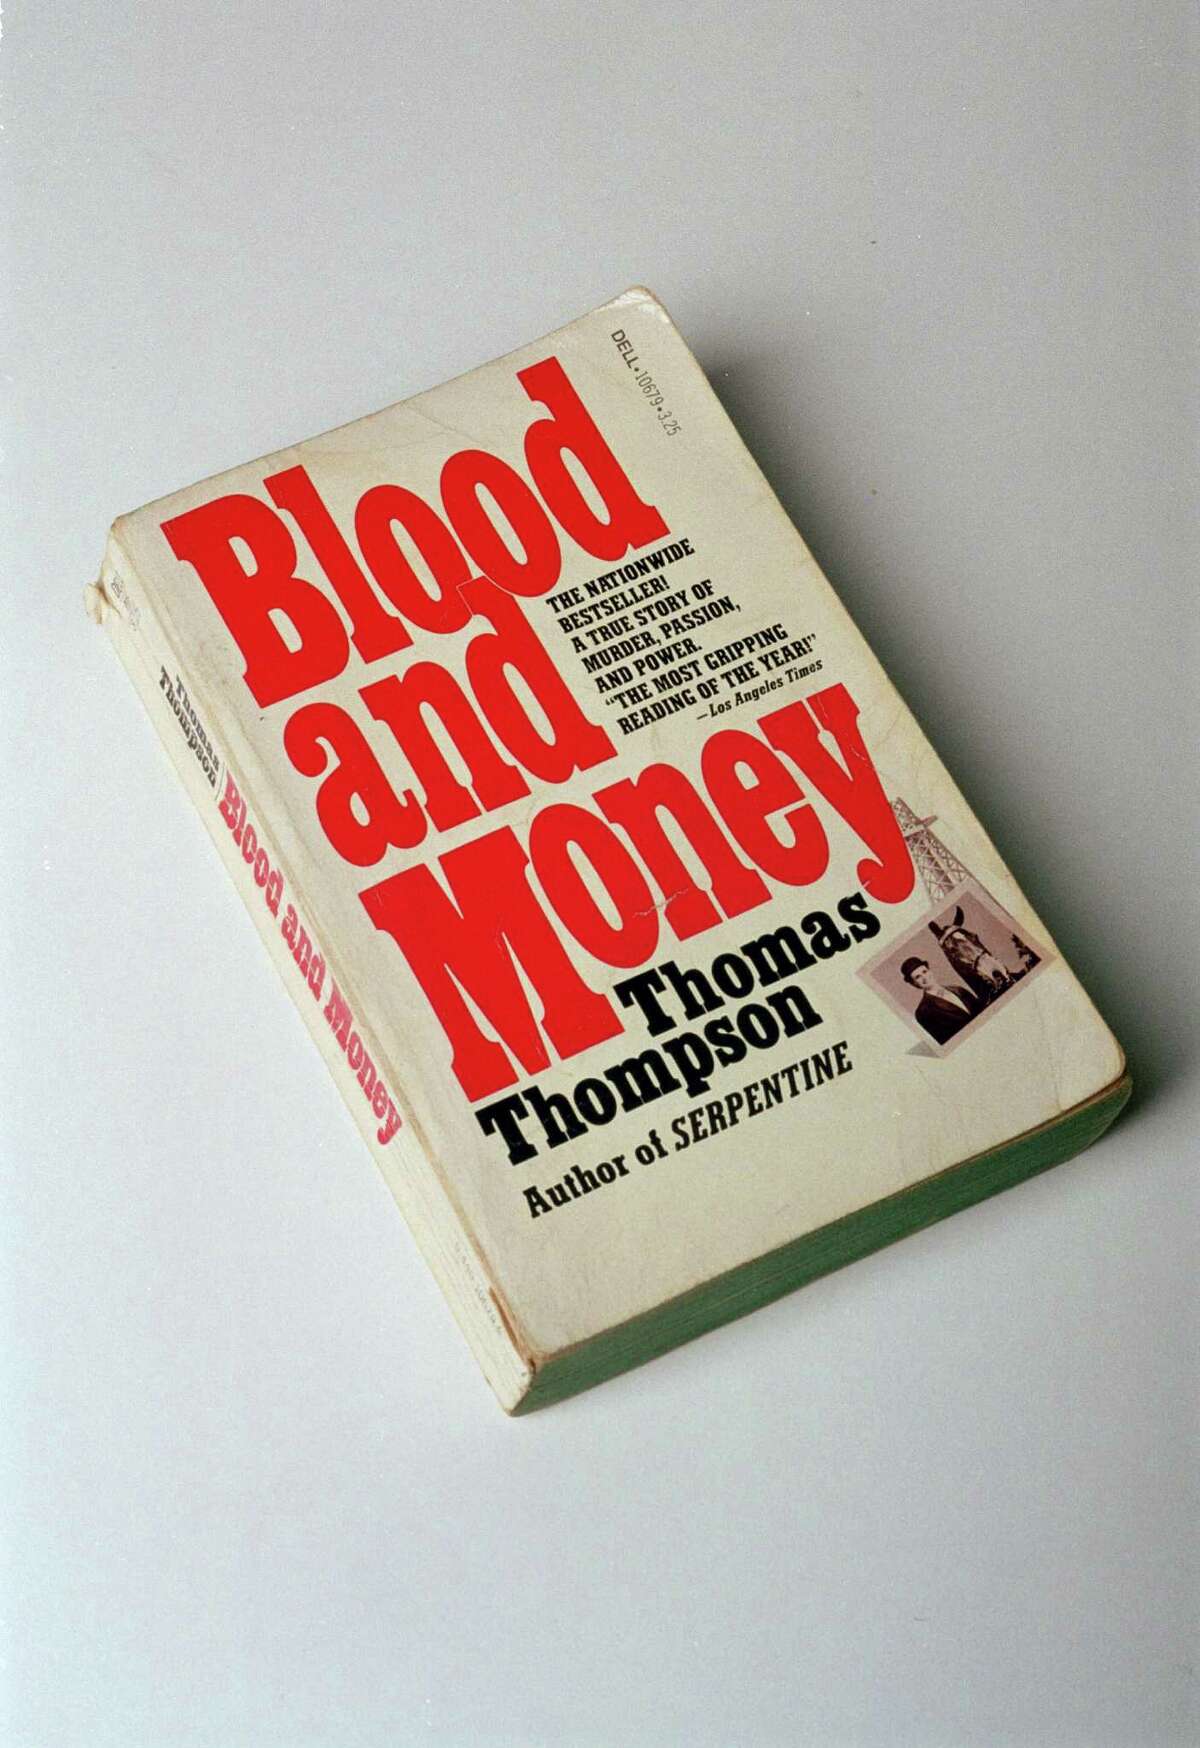 Blood and Money by author Tommy Thompson, shot in the Chronicle studio on 7/17/03. Thomas Thompson